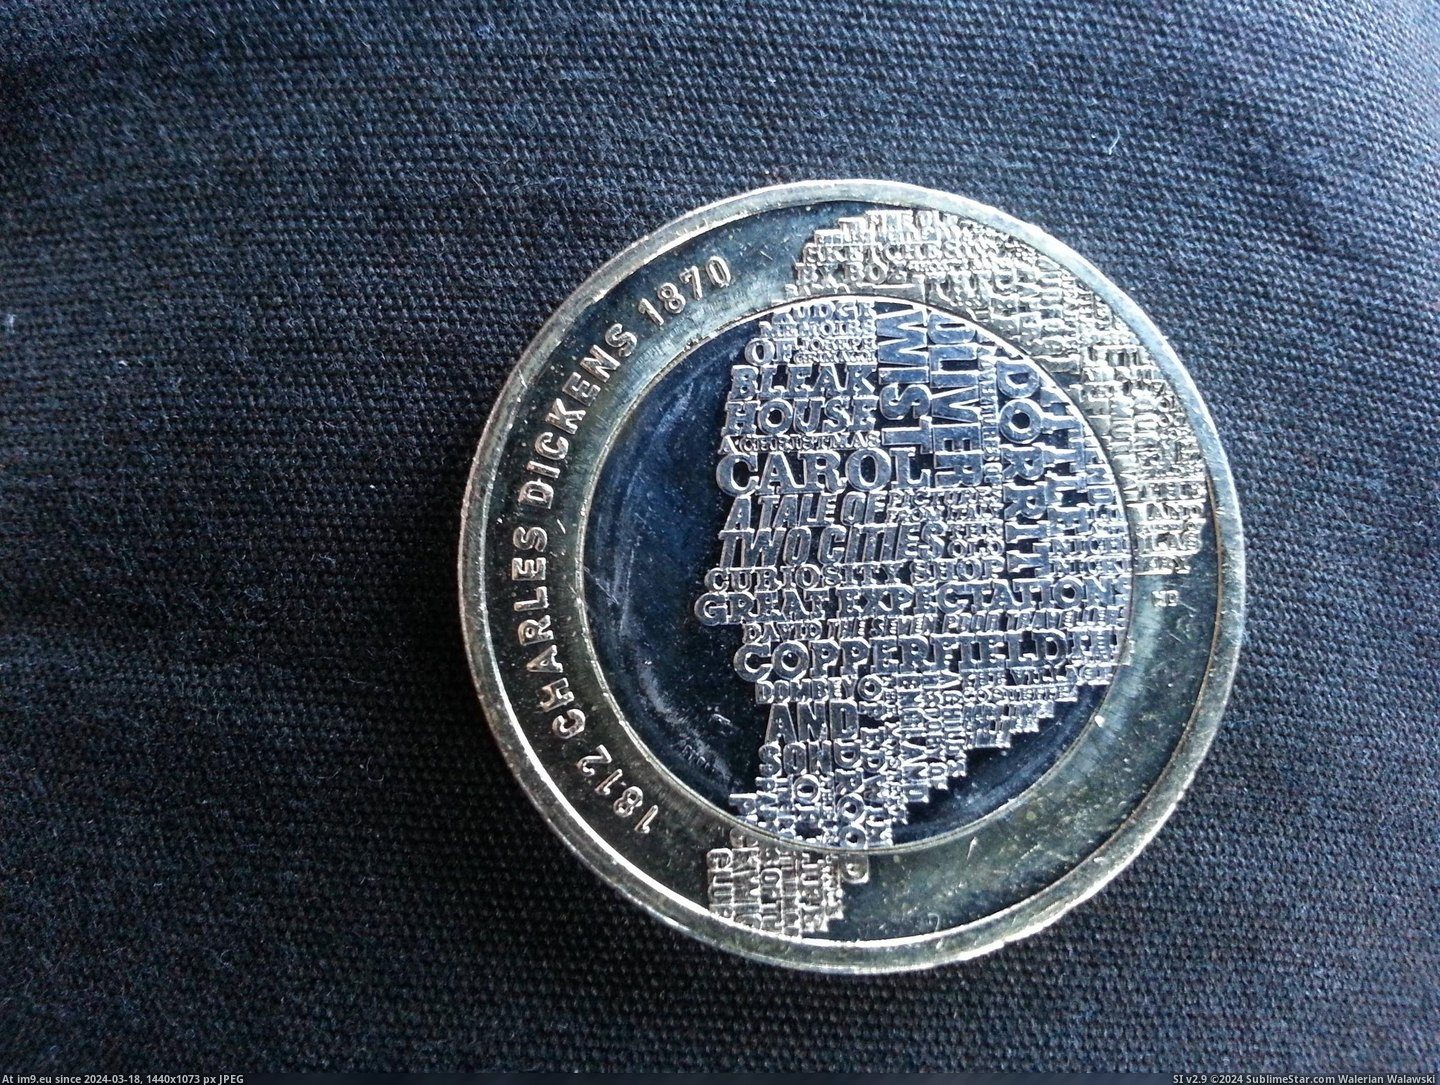 #Was #Thought #Got #Charles #Disappointed #Coin #Darwin #Bit #Change #Wasn [Mildlyinteresting] Got this £2 coin in my change today, thought it was Charles Darwin, bit disappointed it wasn't. Pic. (Image of album My r/MILDLYINTERESTING favs))